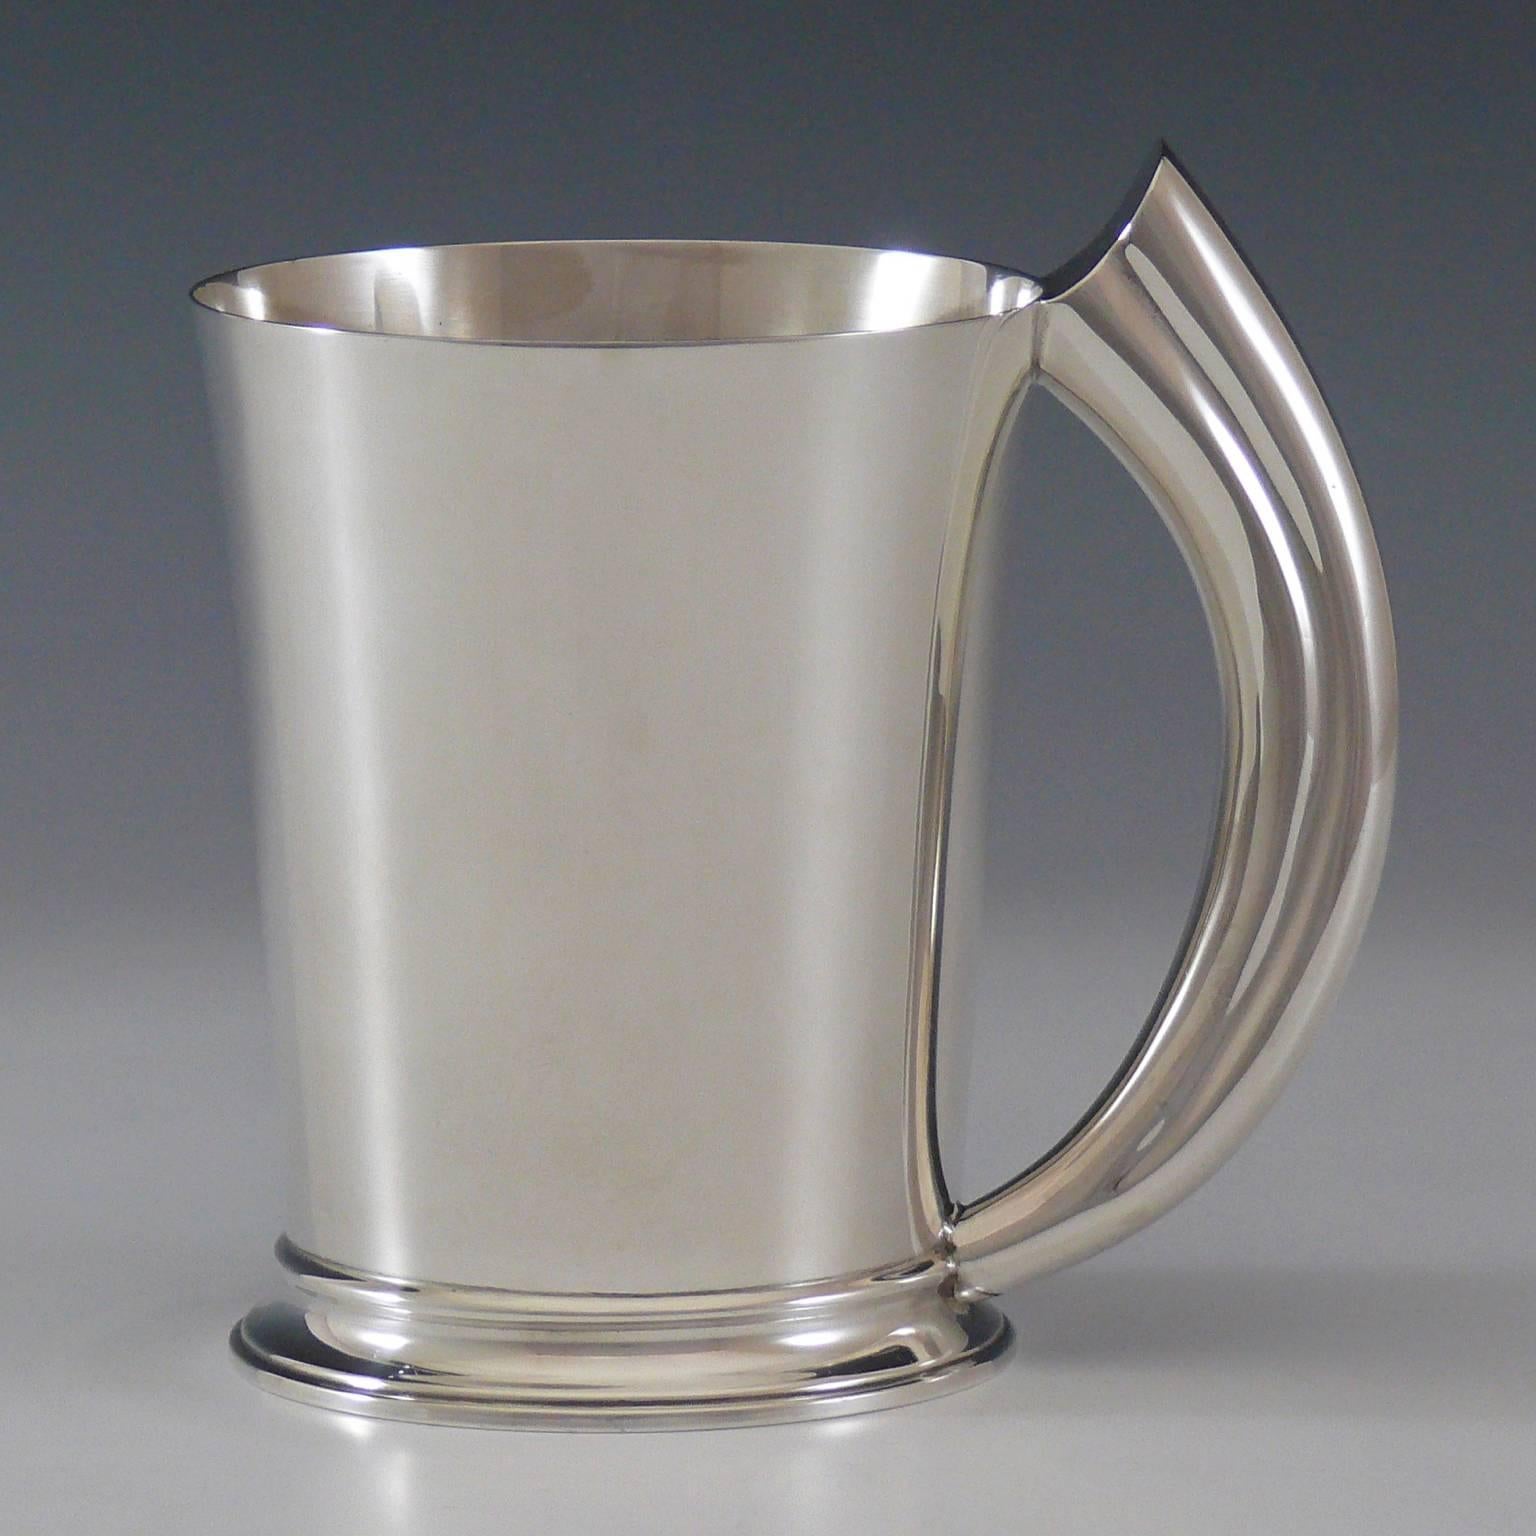 A wonderful Sterling silver tankard by Garrard & Co with shaped silver handle modelled after earlier boars tusk handle tankards that Garrards made at the turn of the 19th-20th century. Hallmarked Birmingham 1979 and with full Garrard’s makers and